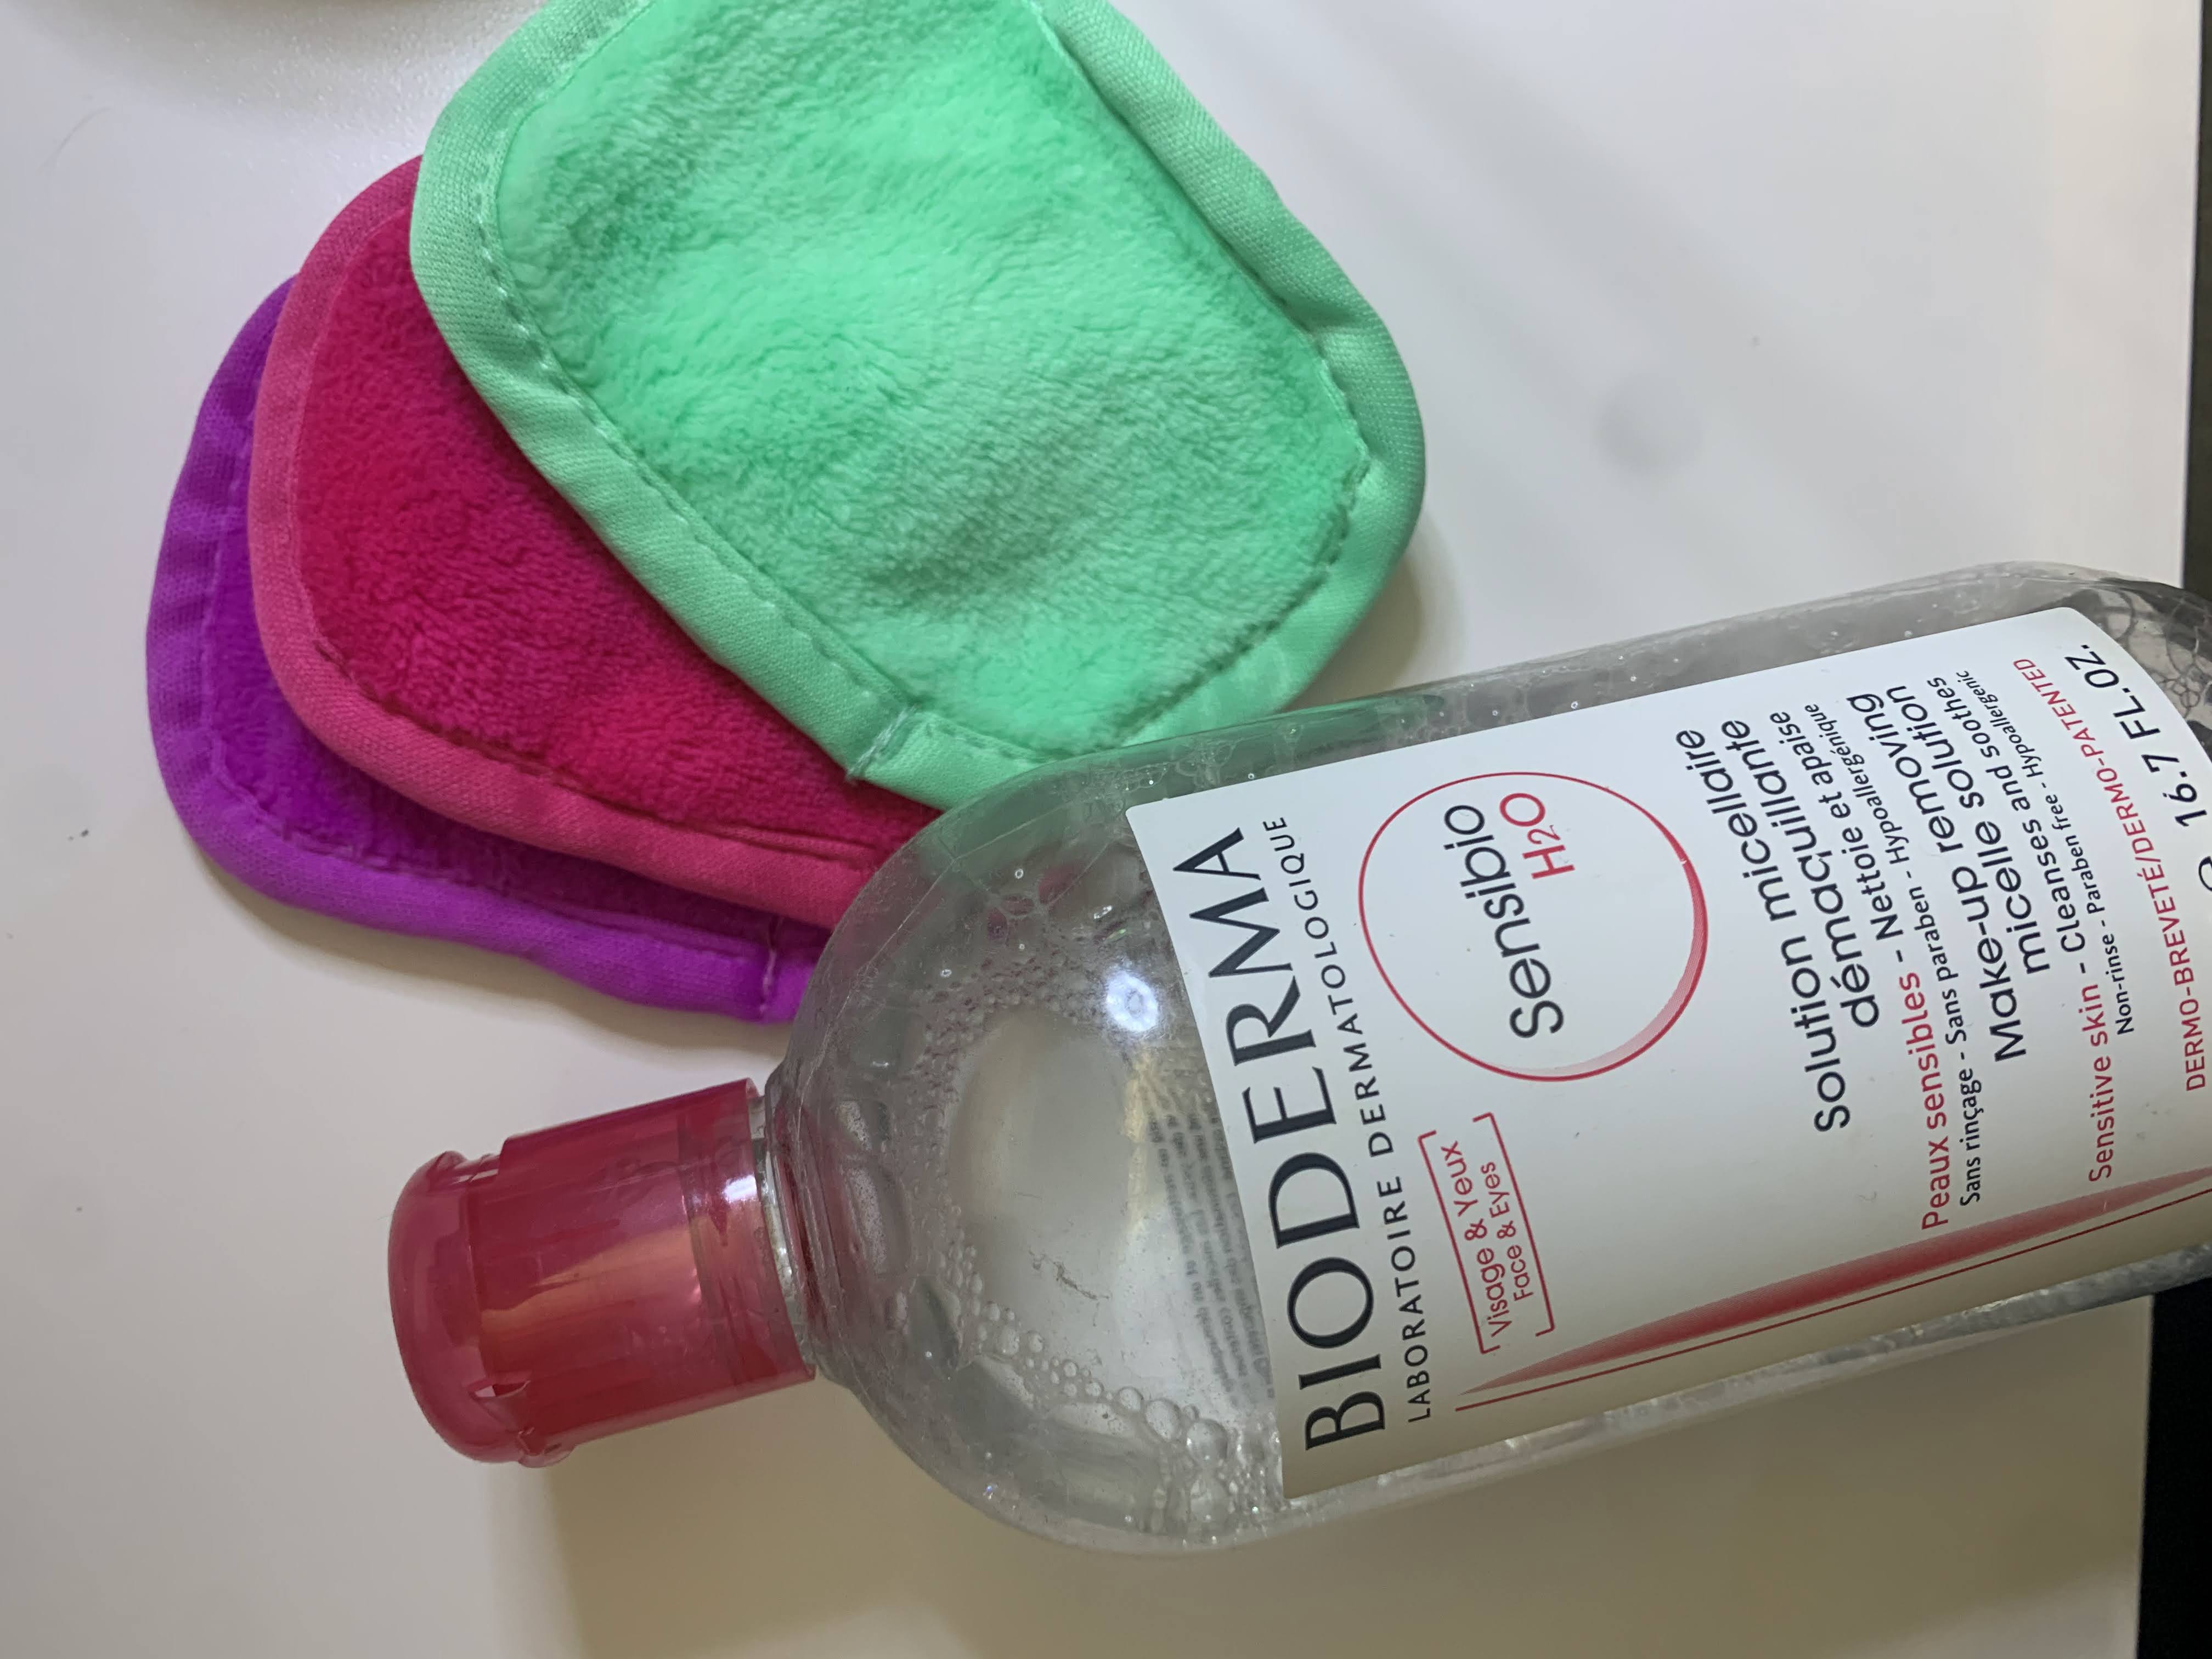 How to remove makeup without wipes is using Bioderma Sensibio H2O and makeup eraser 7 day set